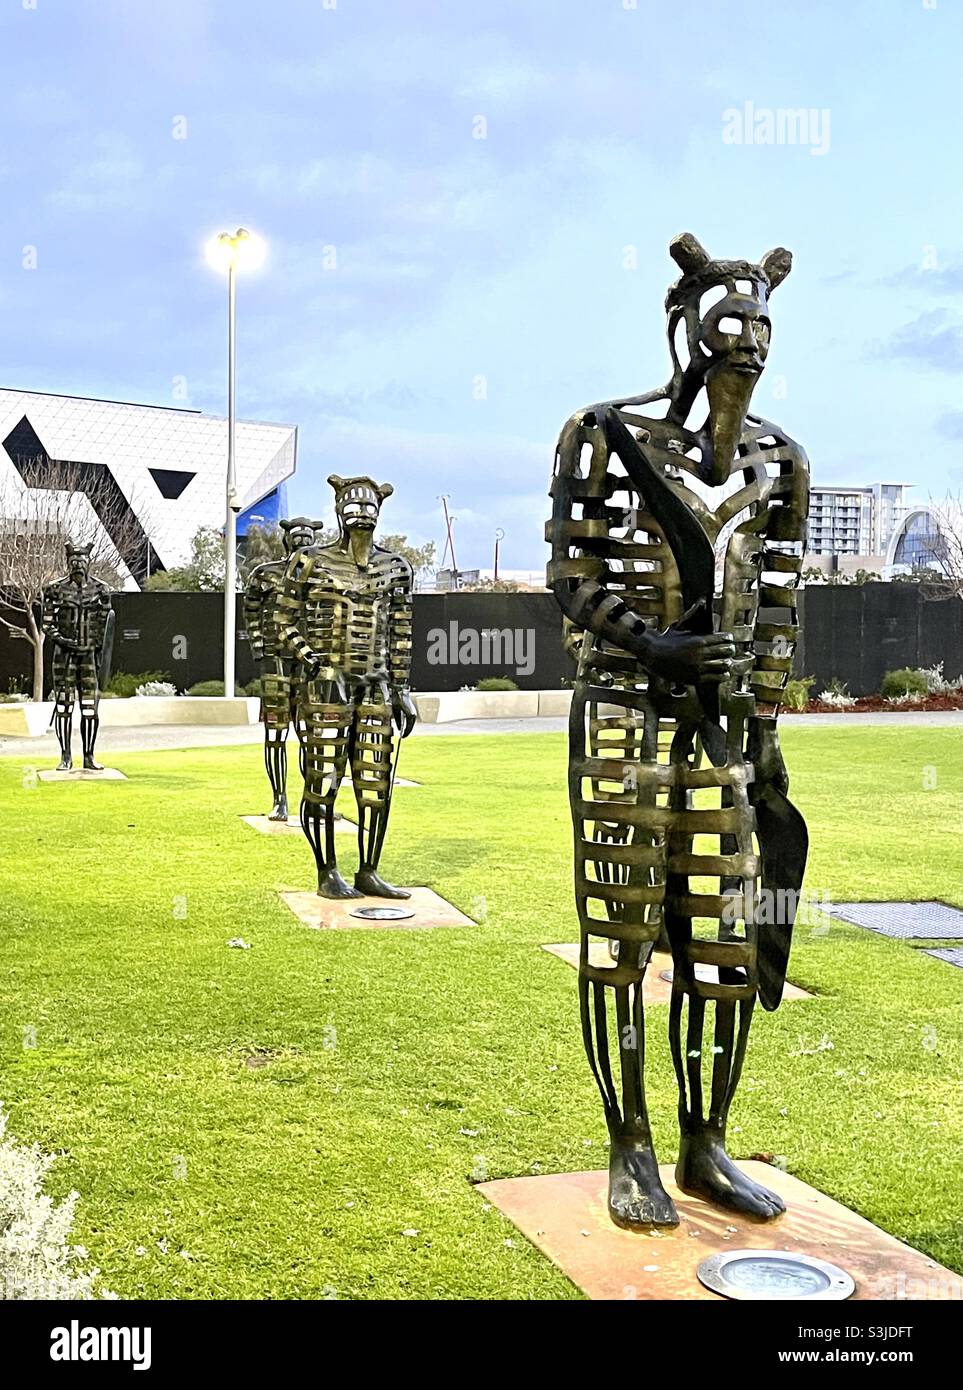 Koorden sculptures, sculptural figures by Rod Garlett and Ritchie Kuhaupt at Telethon Gardens Kings Square Perth Western Australia Stock Photo